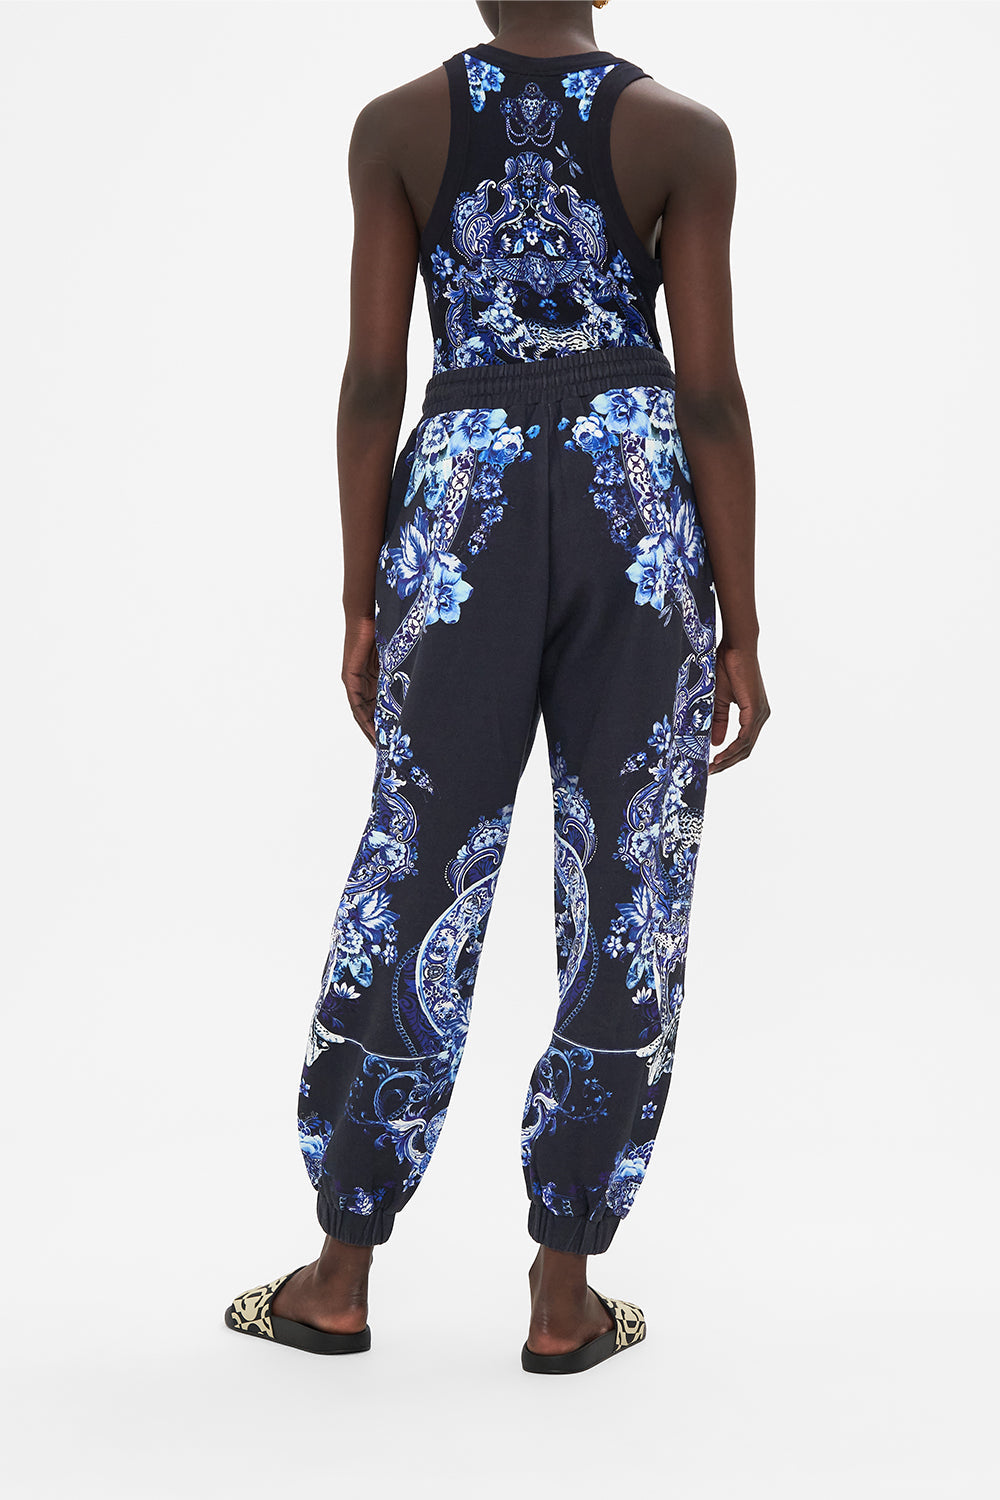 Back view of model wearing CAMILLA designer track pants in Delft Dynasty print 